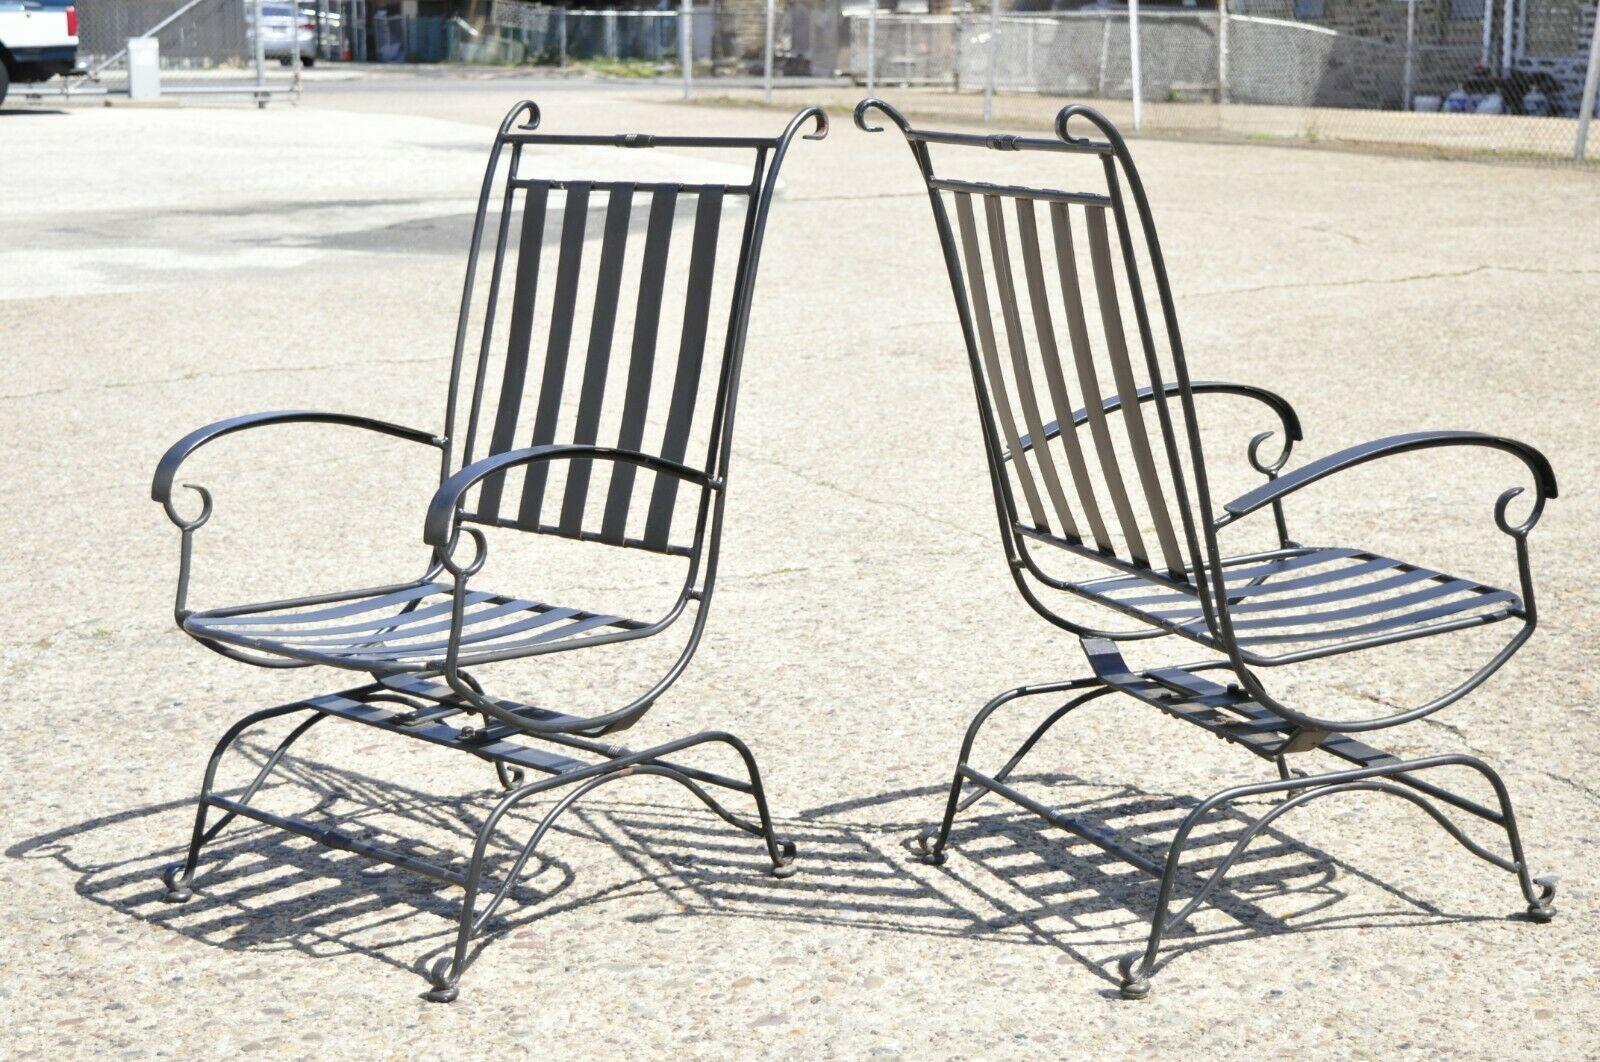 Hollywood Regency Style Black Wrought Iron Rock and Spring Garden Patio Chairs - a Pair. Item features heavy wrought iron and steel frames, rock and tilt spring scrolling base, very nice pair, quality craftsmanship, great style and form. Circa Late